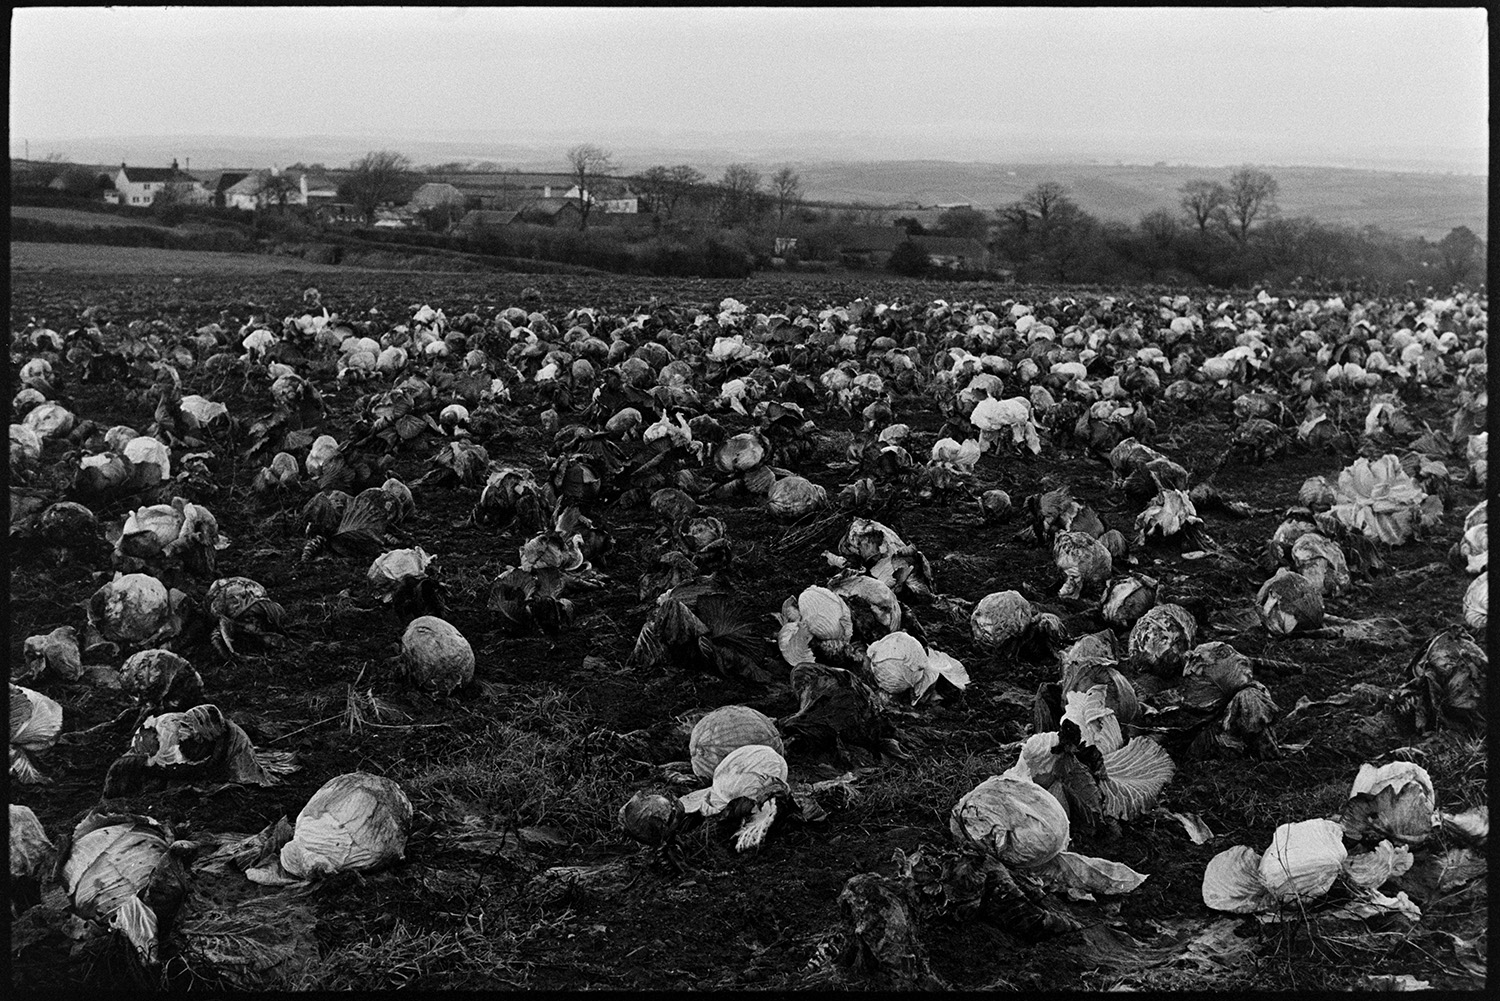 Field of cabbages. 
[A field with a crop of cabbages at Week, High Bickington. Trees and houses can be seen in the background.]